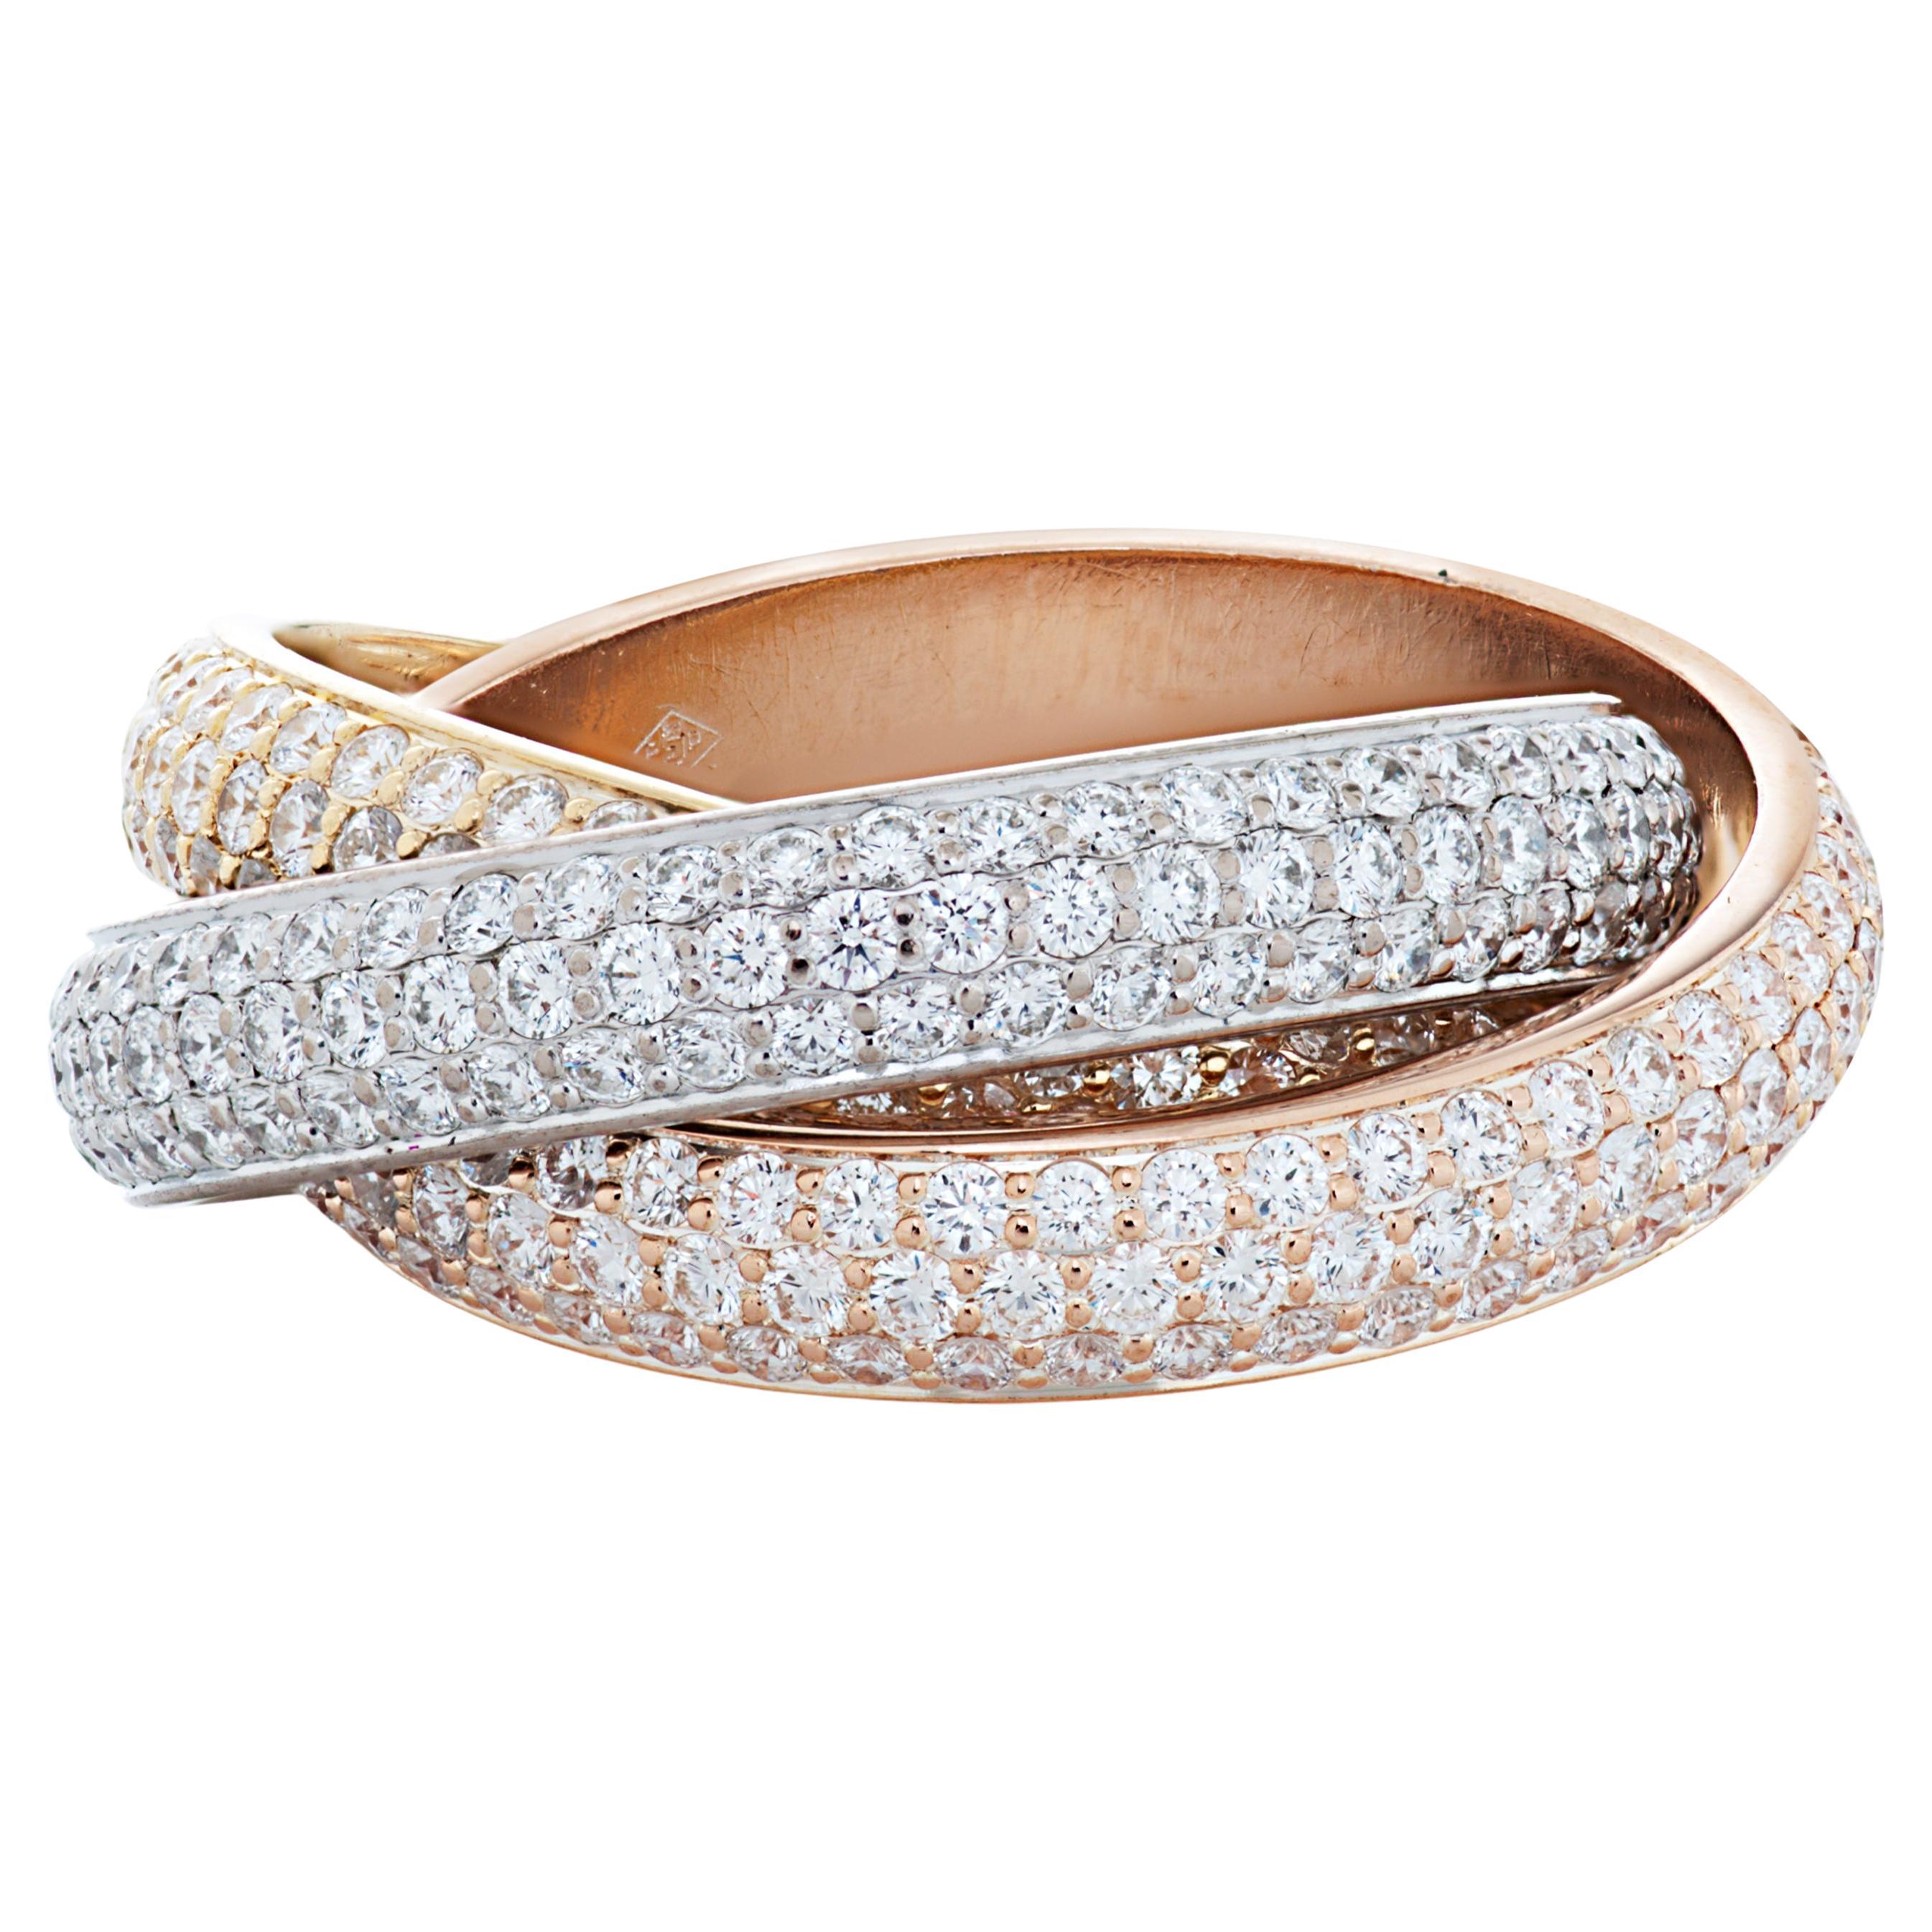 Cartier Classic Model Diamond Trinity Ring in 18k White, Yellow and Rose Gold